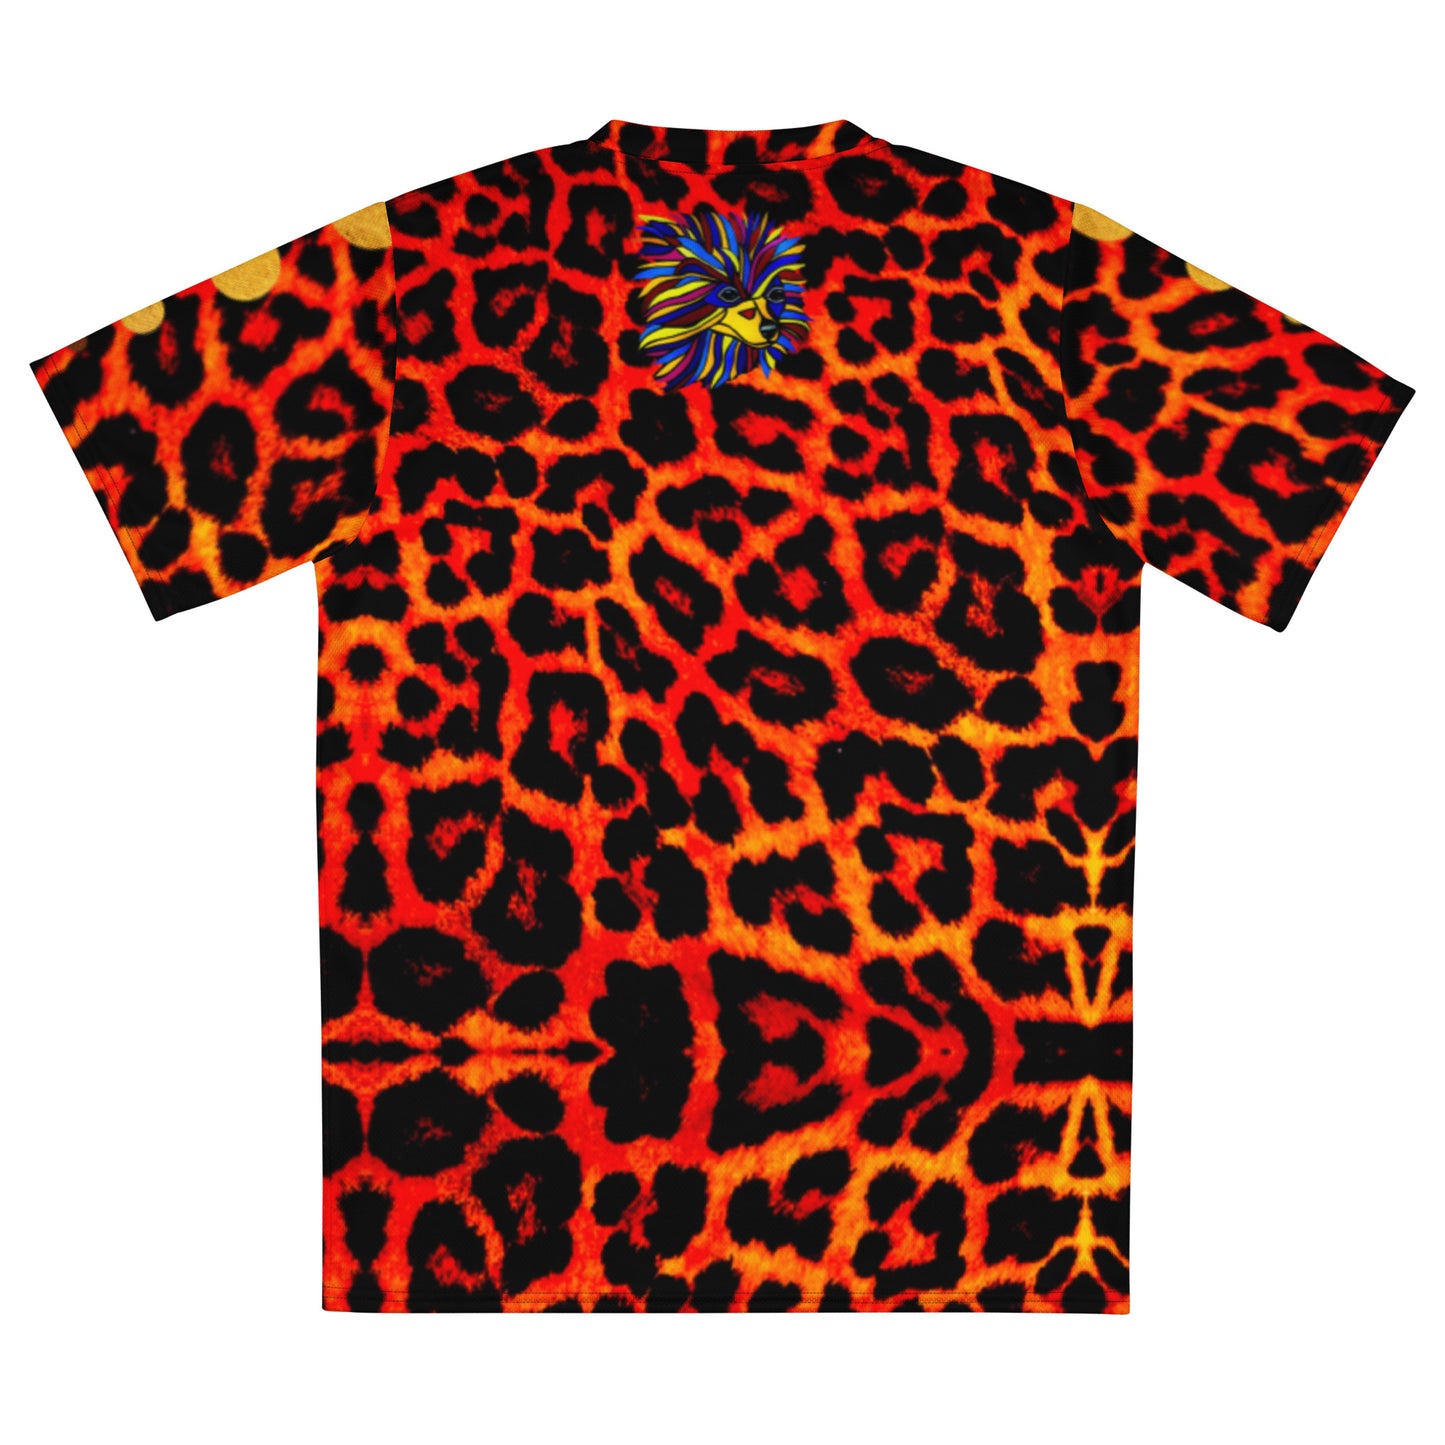 Jersey Top Born to be Wild on Blazing Cheetah Pattern - DMD Bags